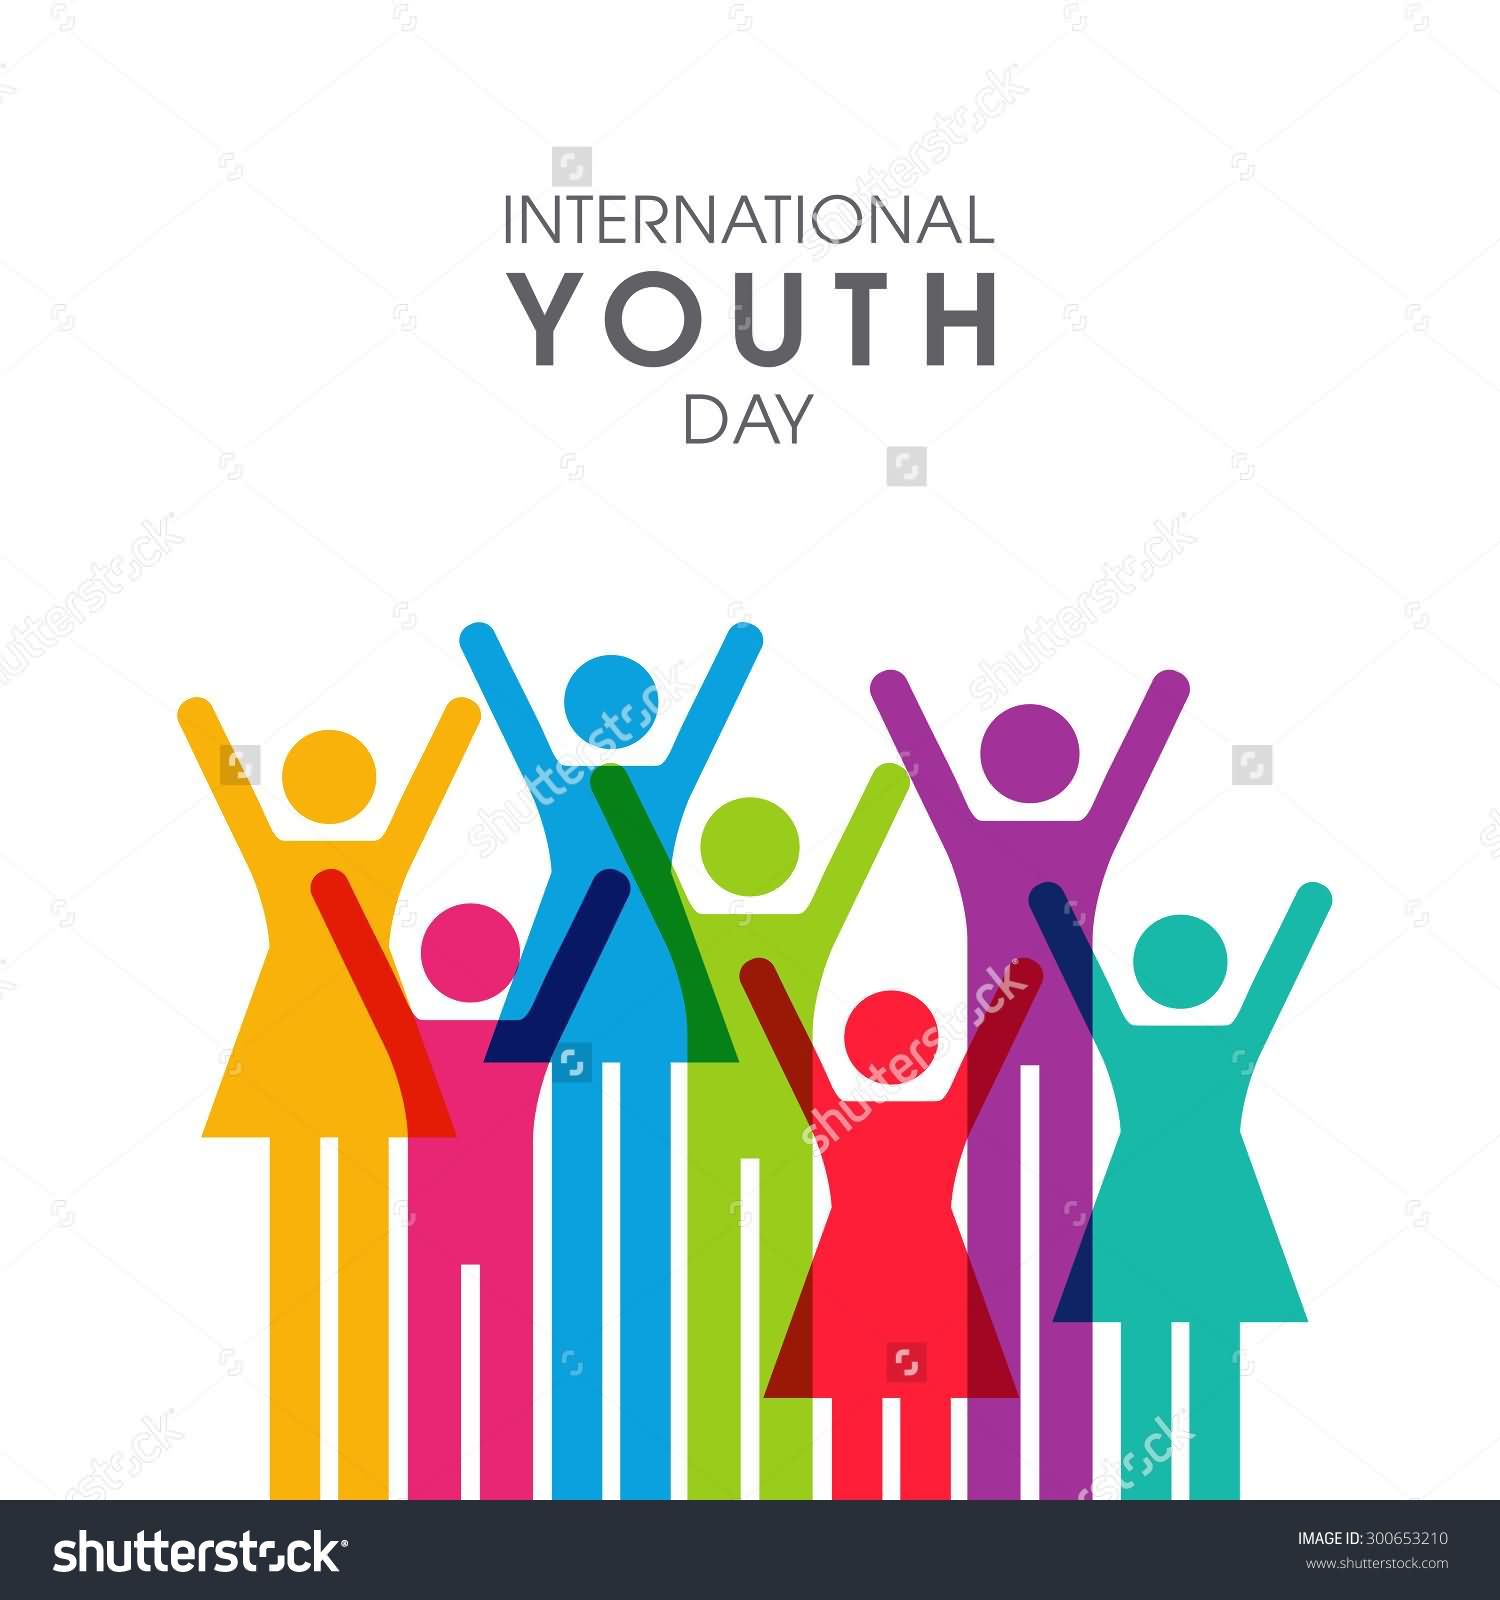 International Youth Day Colorful People With Hands Up Illustration